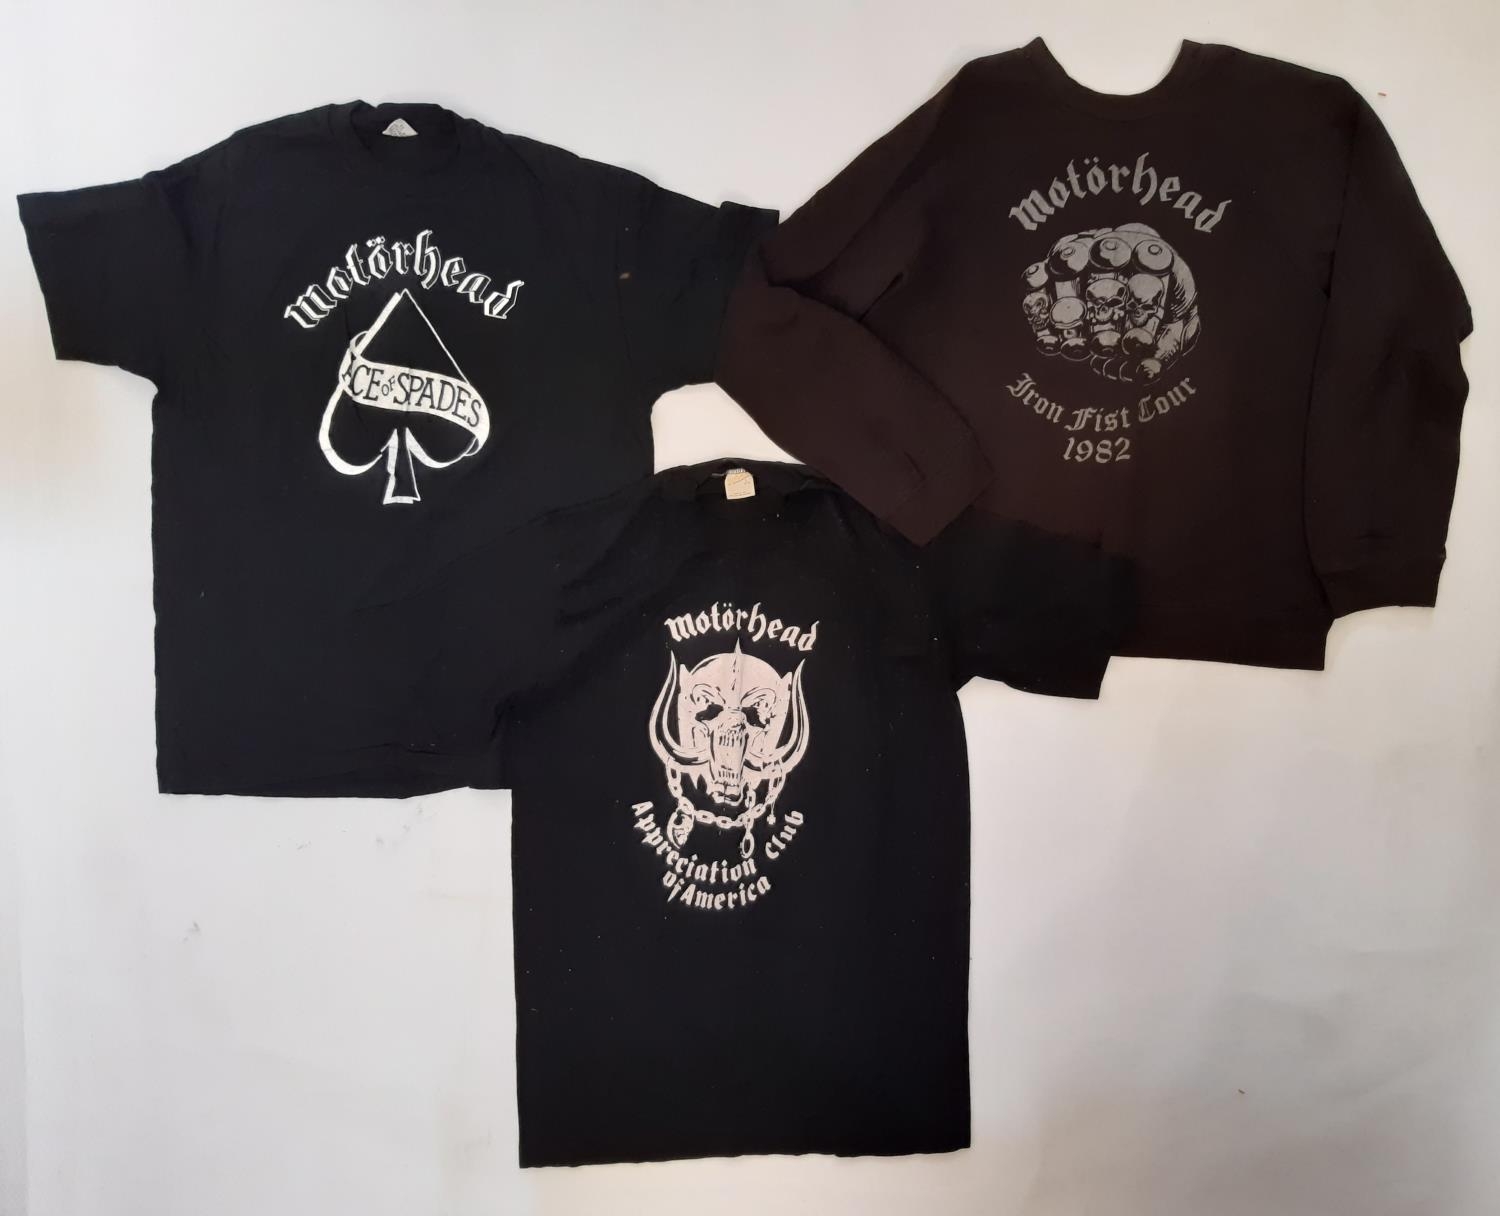 10 vintage T shirts / sweatshirts featuring the bands Motor Head, Hawkwind and Judas Priest - Image 5 of 6